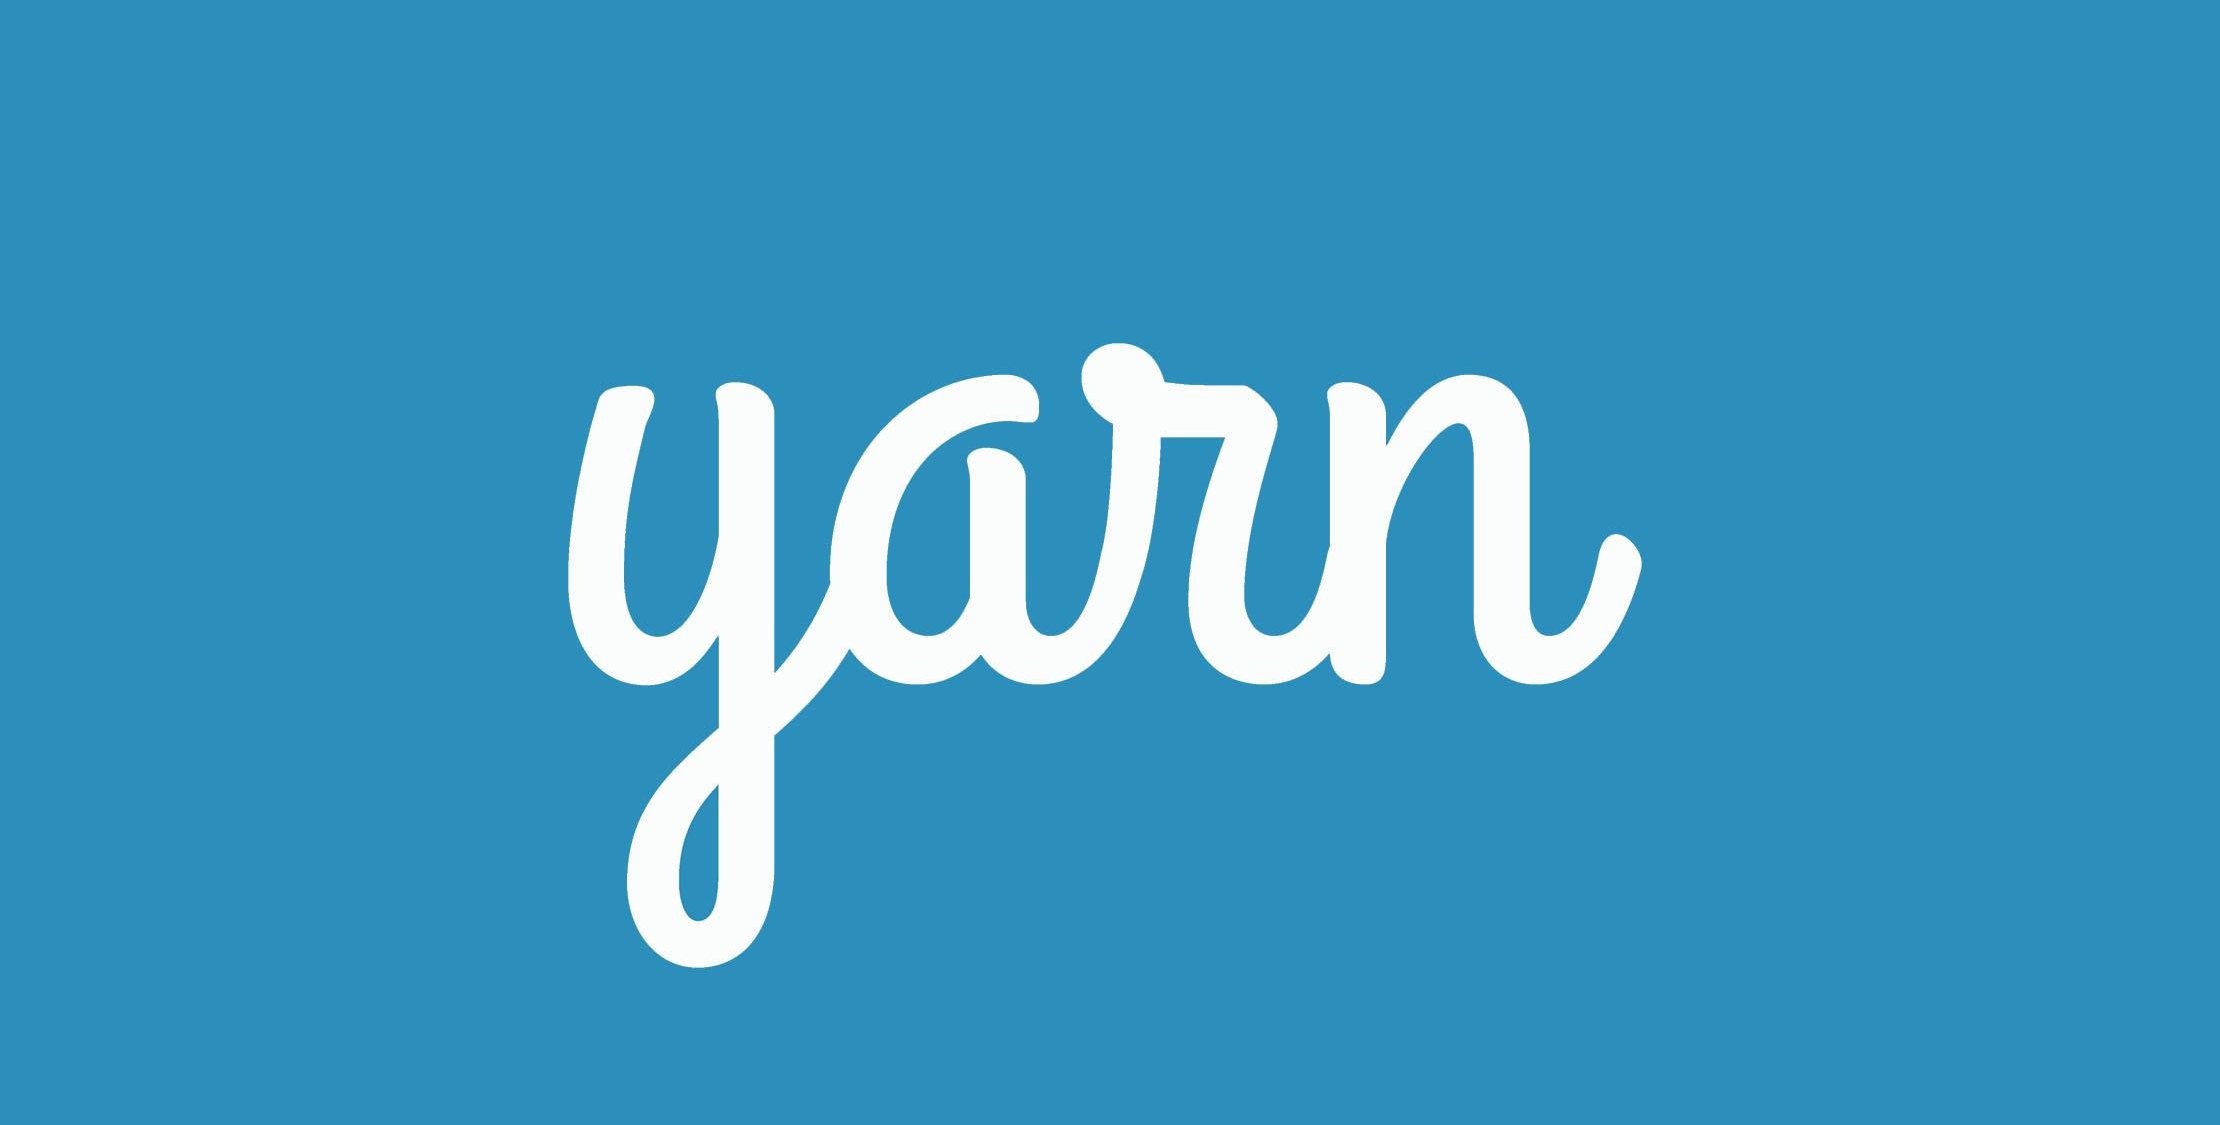 Yarn is Facebook’s new lightning fast package manager for JavaScript image